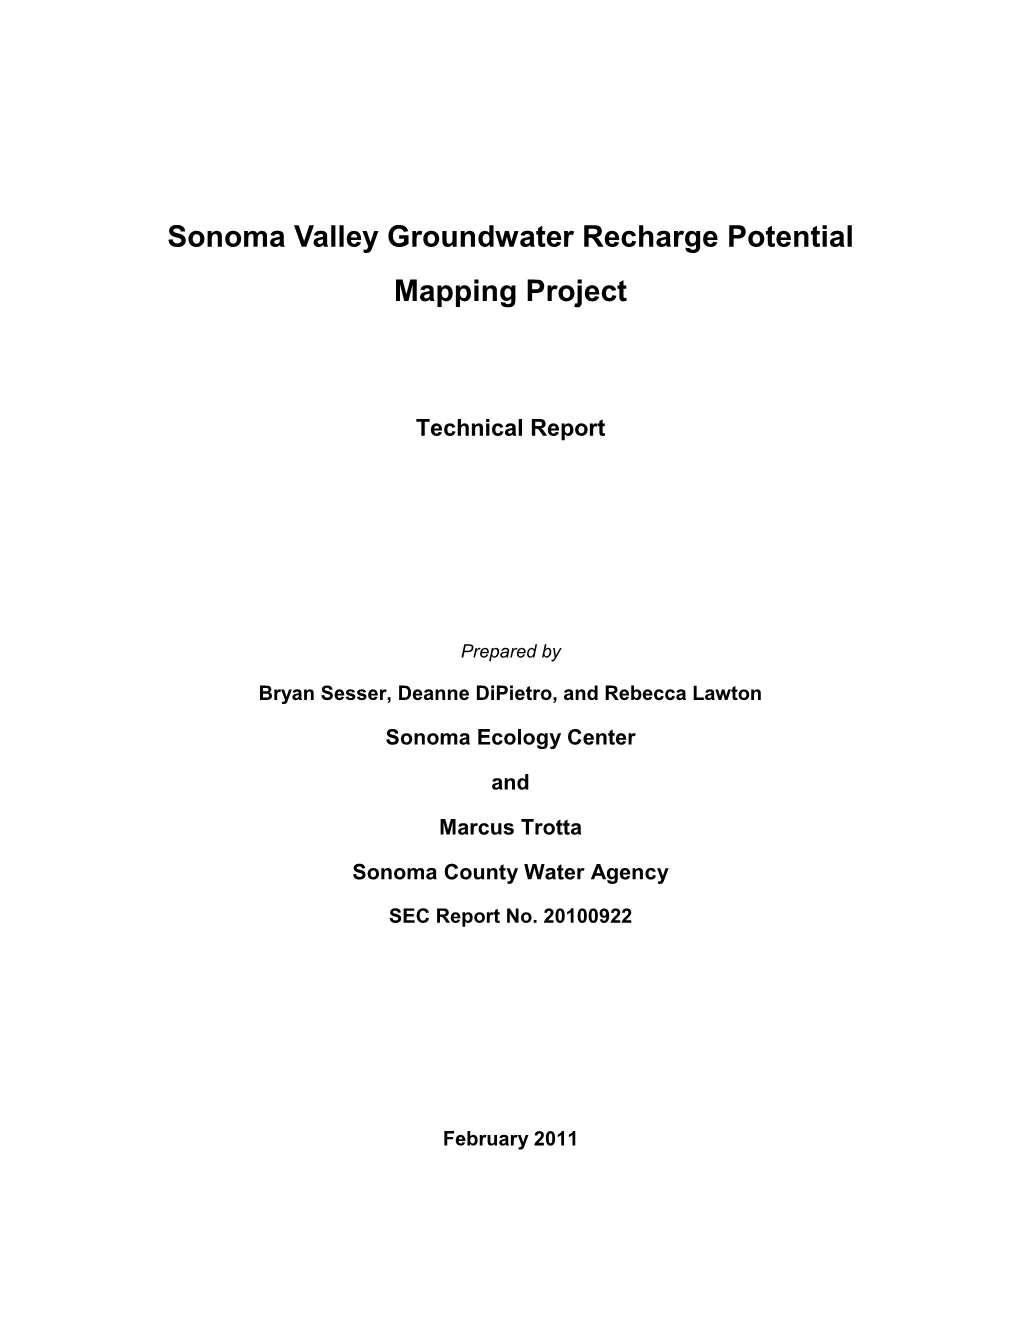 Sonoma Valley Groundwater Recharge Mapping